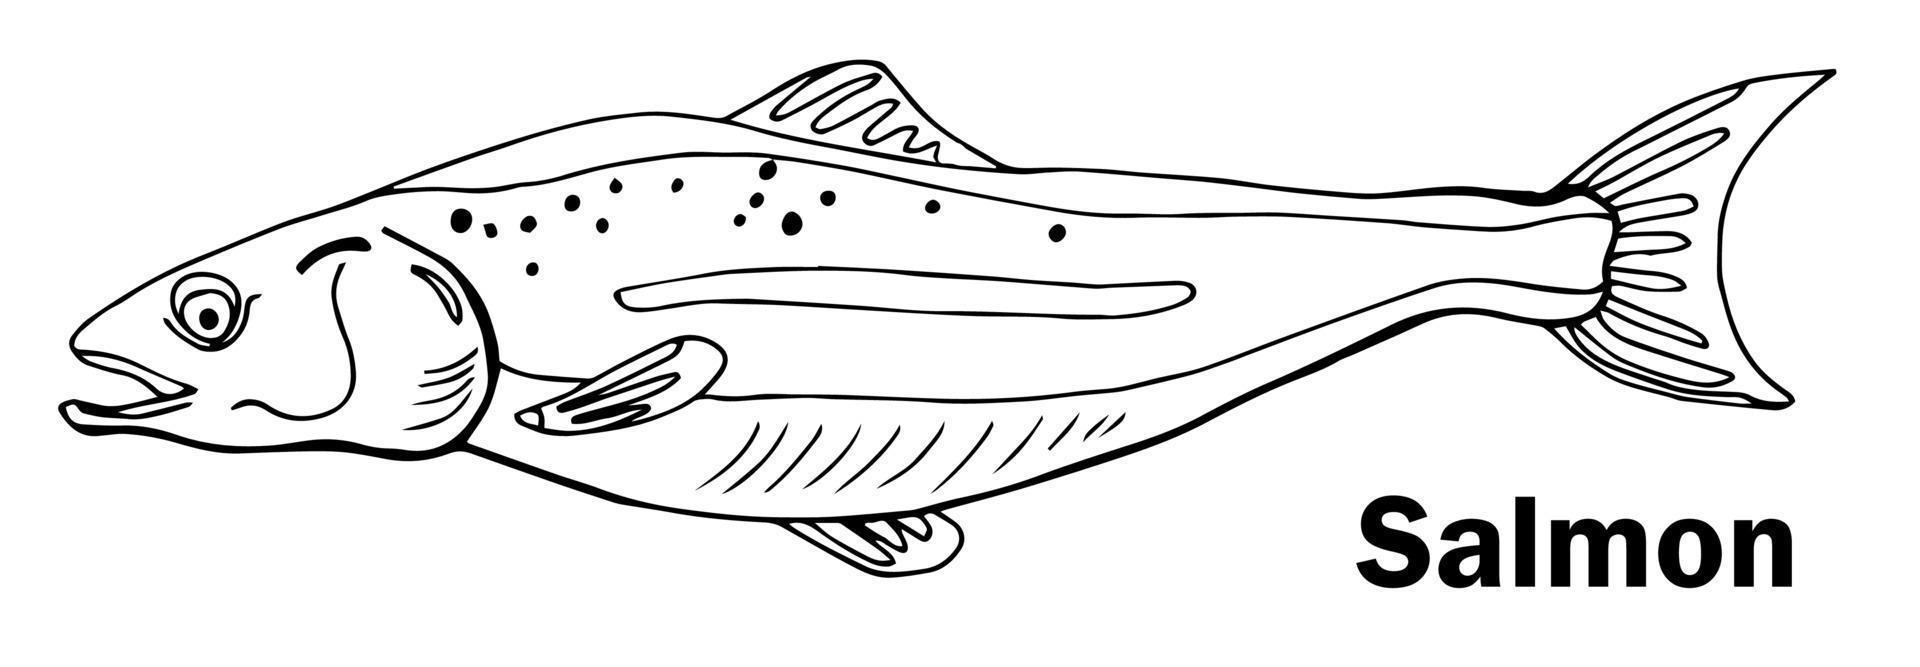 A hand drawn vector sketch doodle illustration of a Salmon fish.